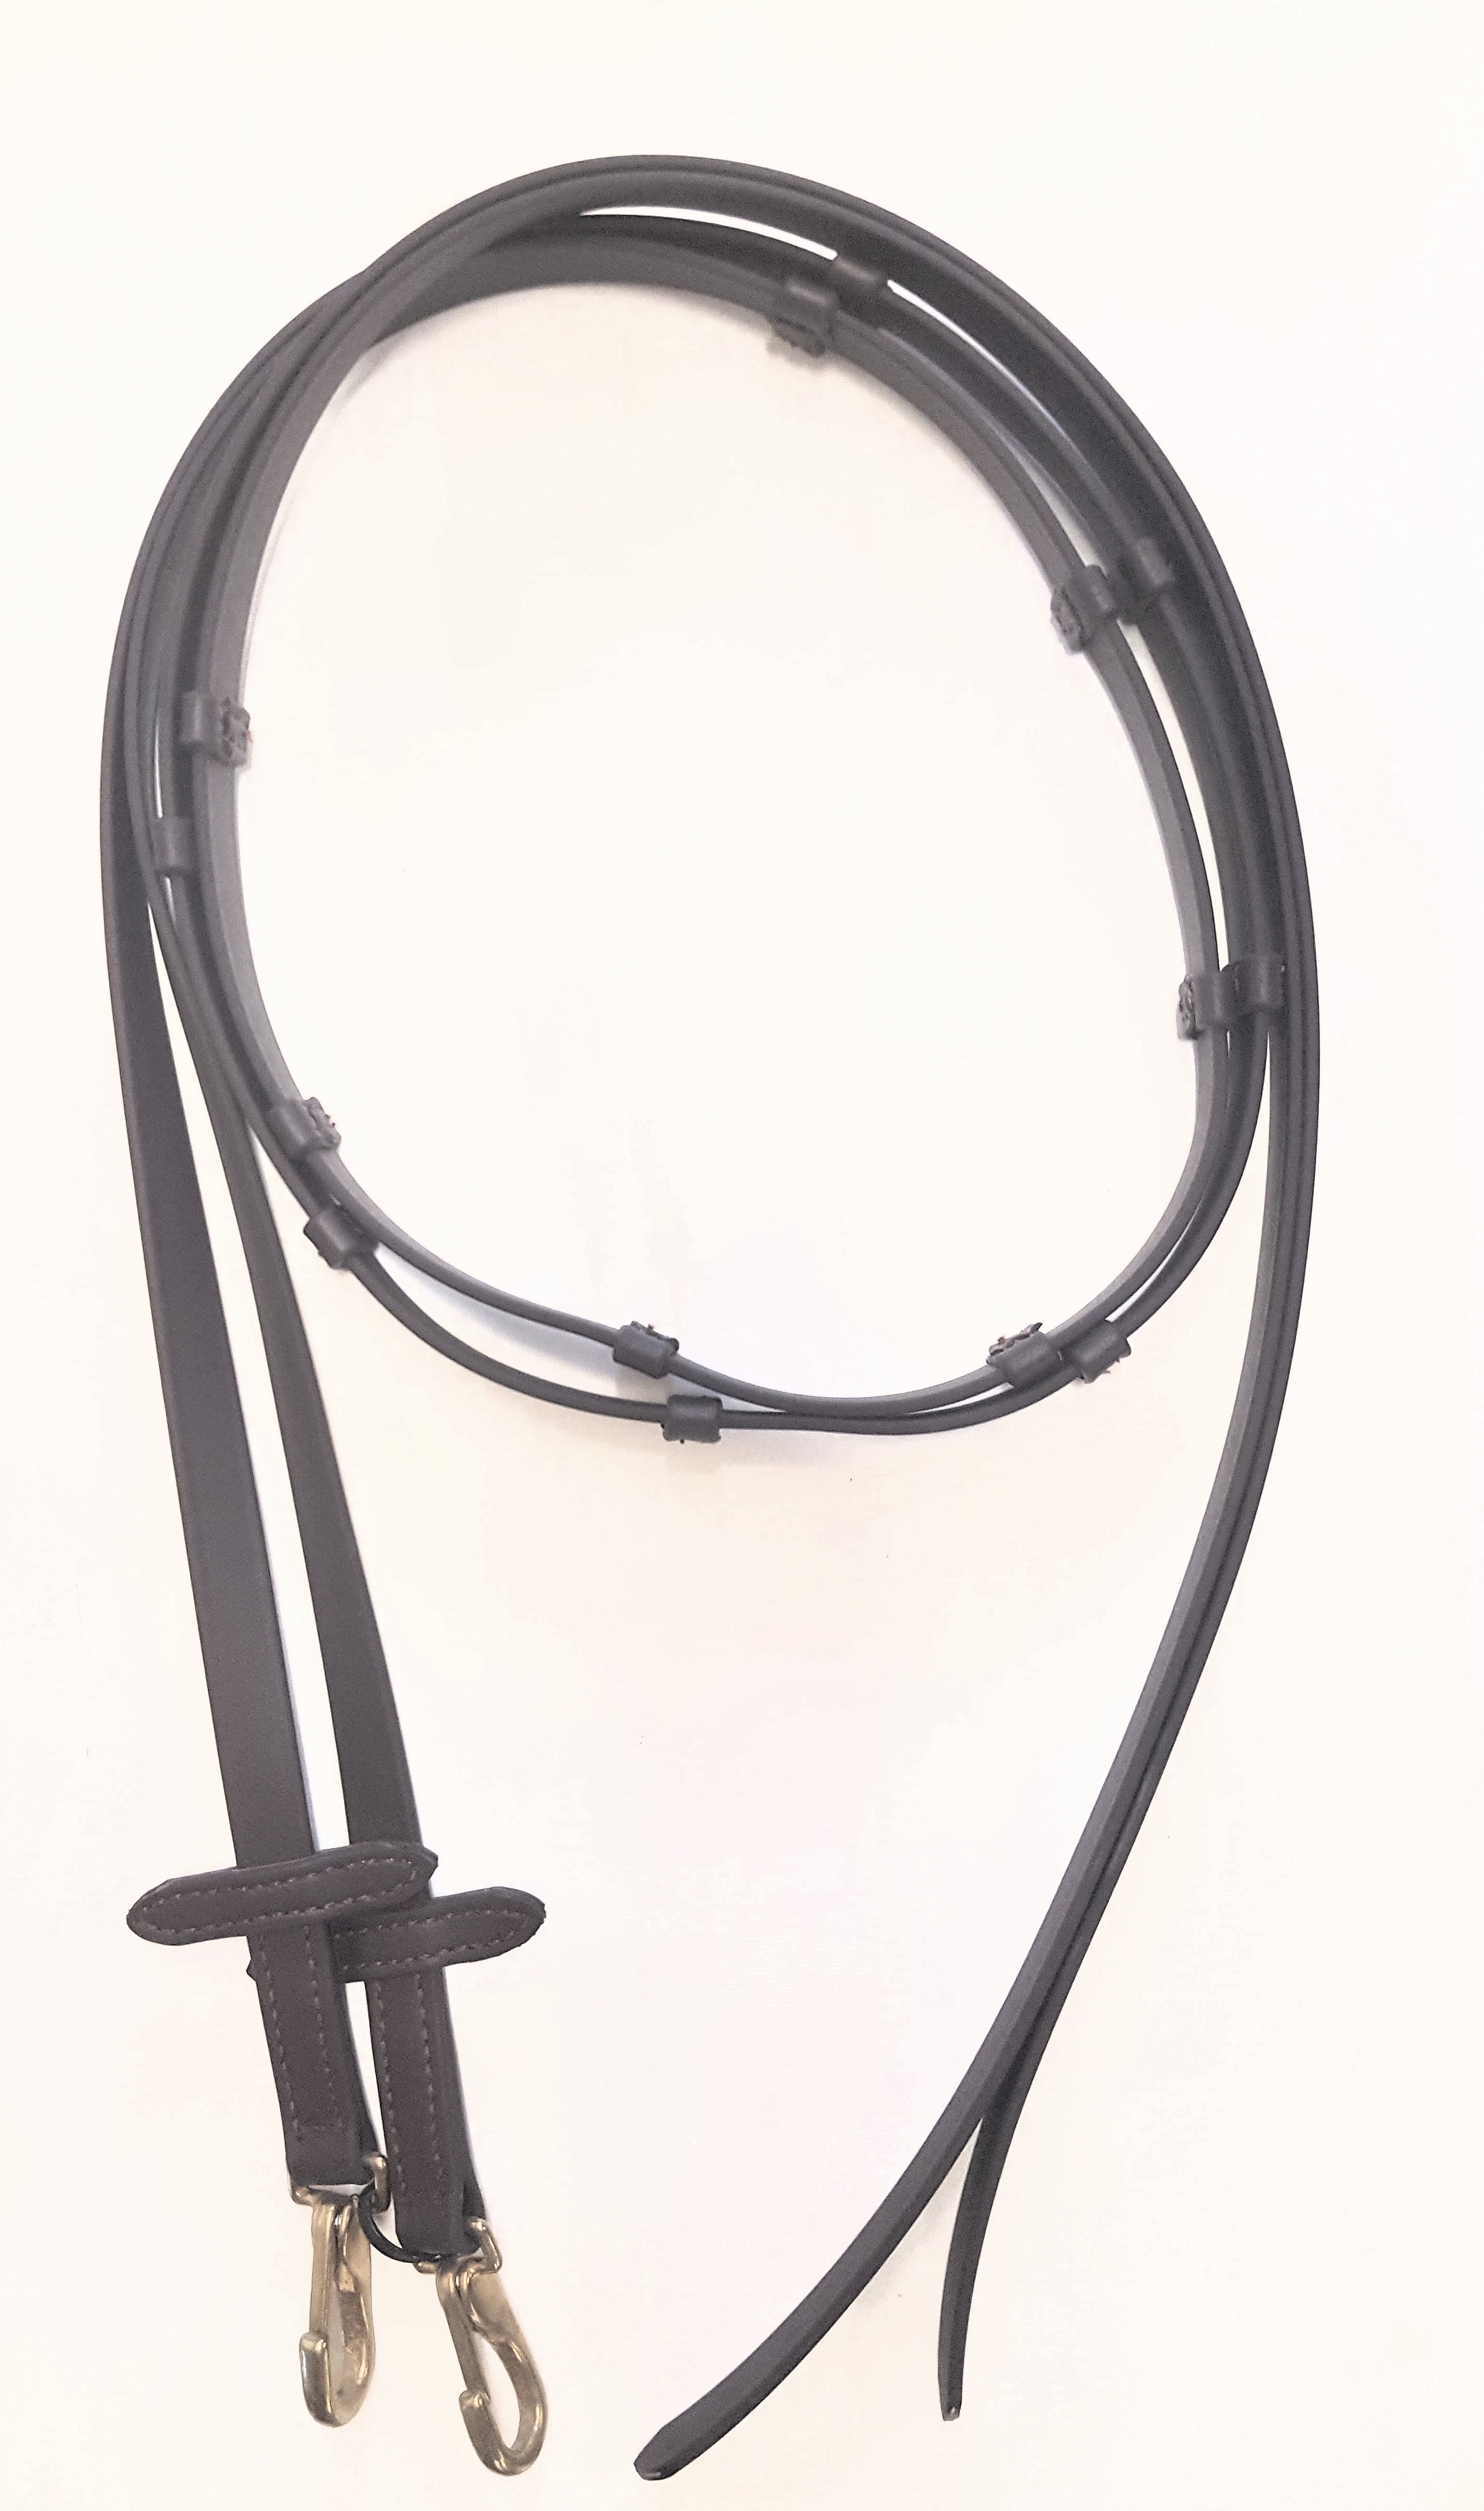 7' Beta Smooth Reins with Knobs